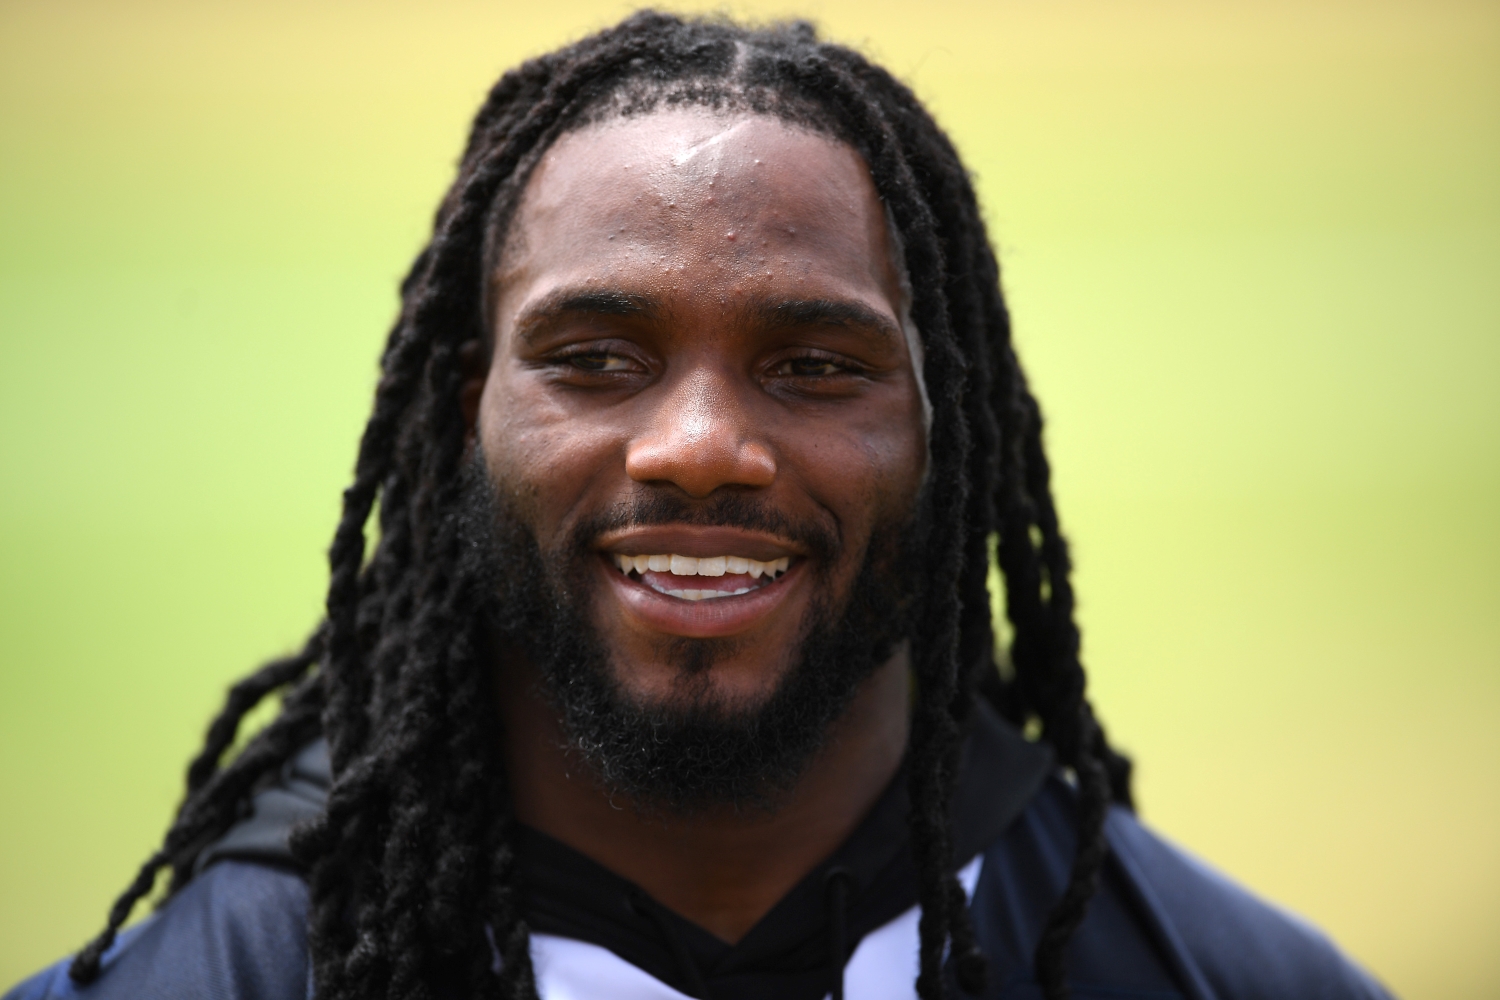 Jaylon Smith speaks to the media during training camp.